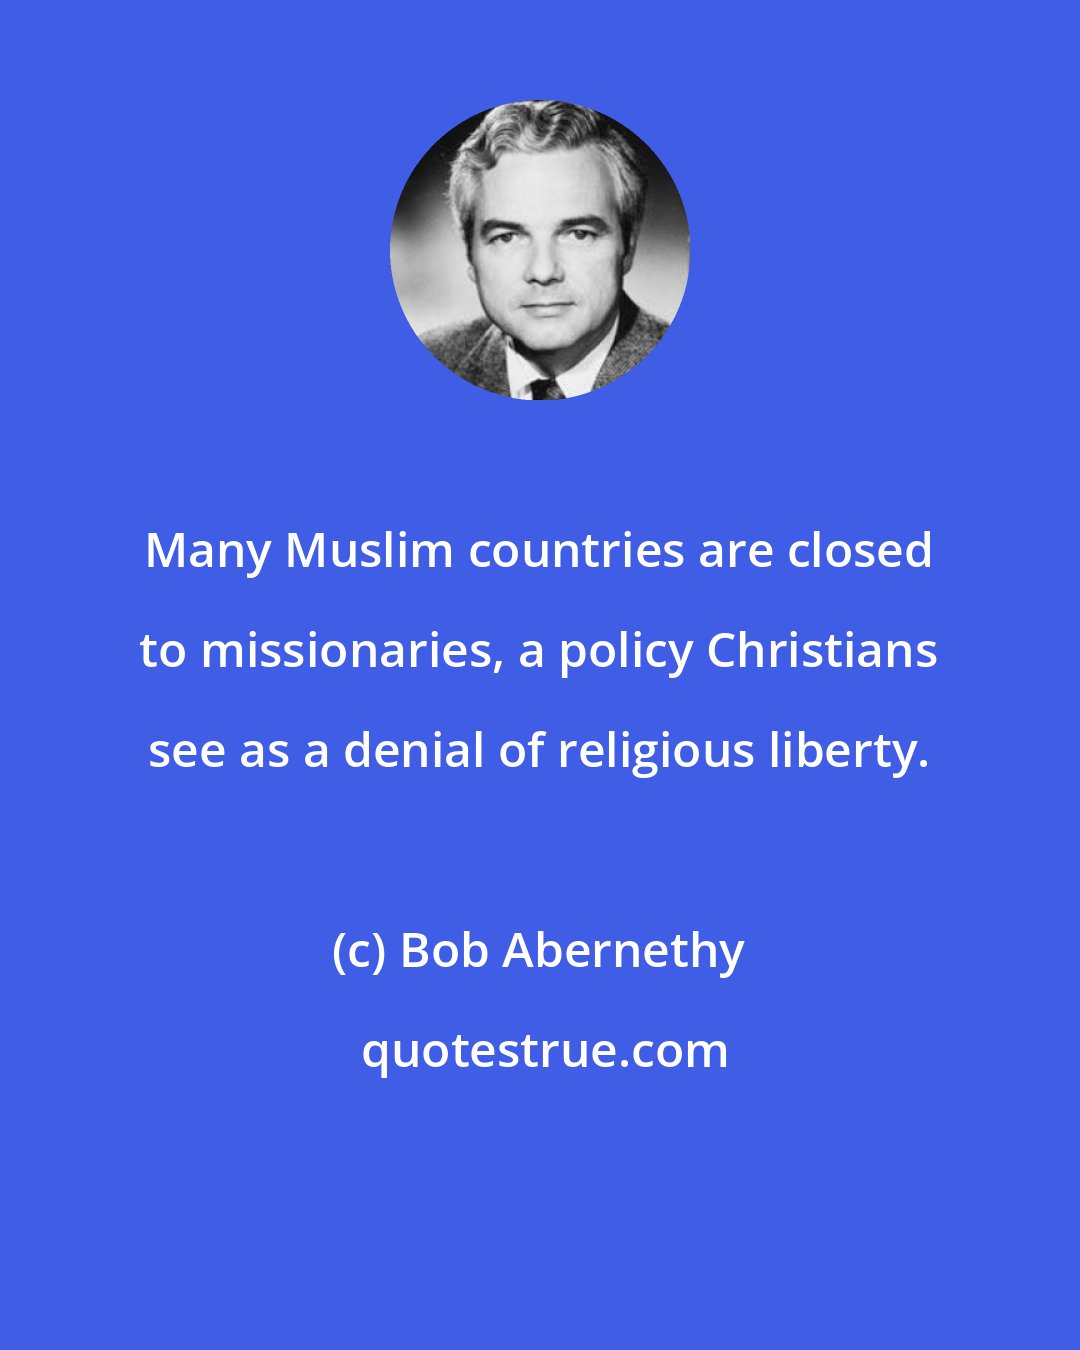 Bob Abernethy: Many Muslim countries are closed to missionaries, a policy Christians see as a denial of religious liberty.